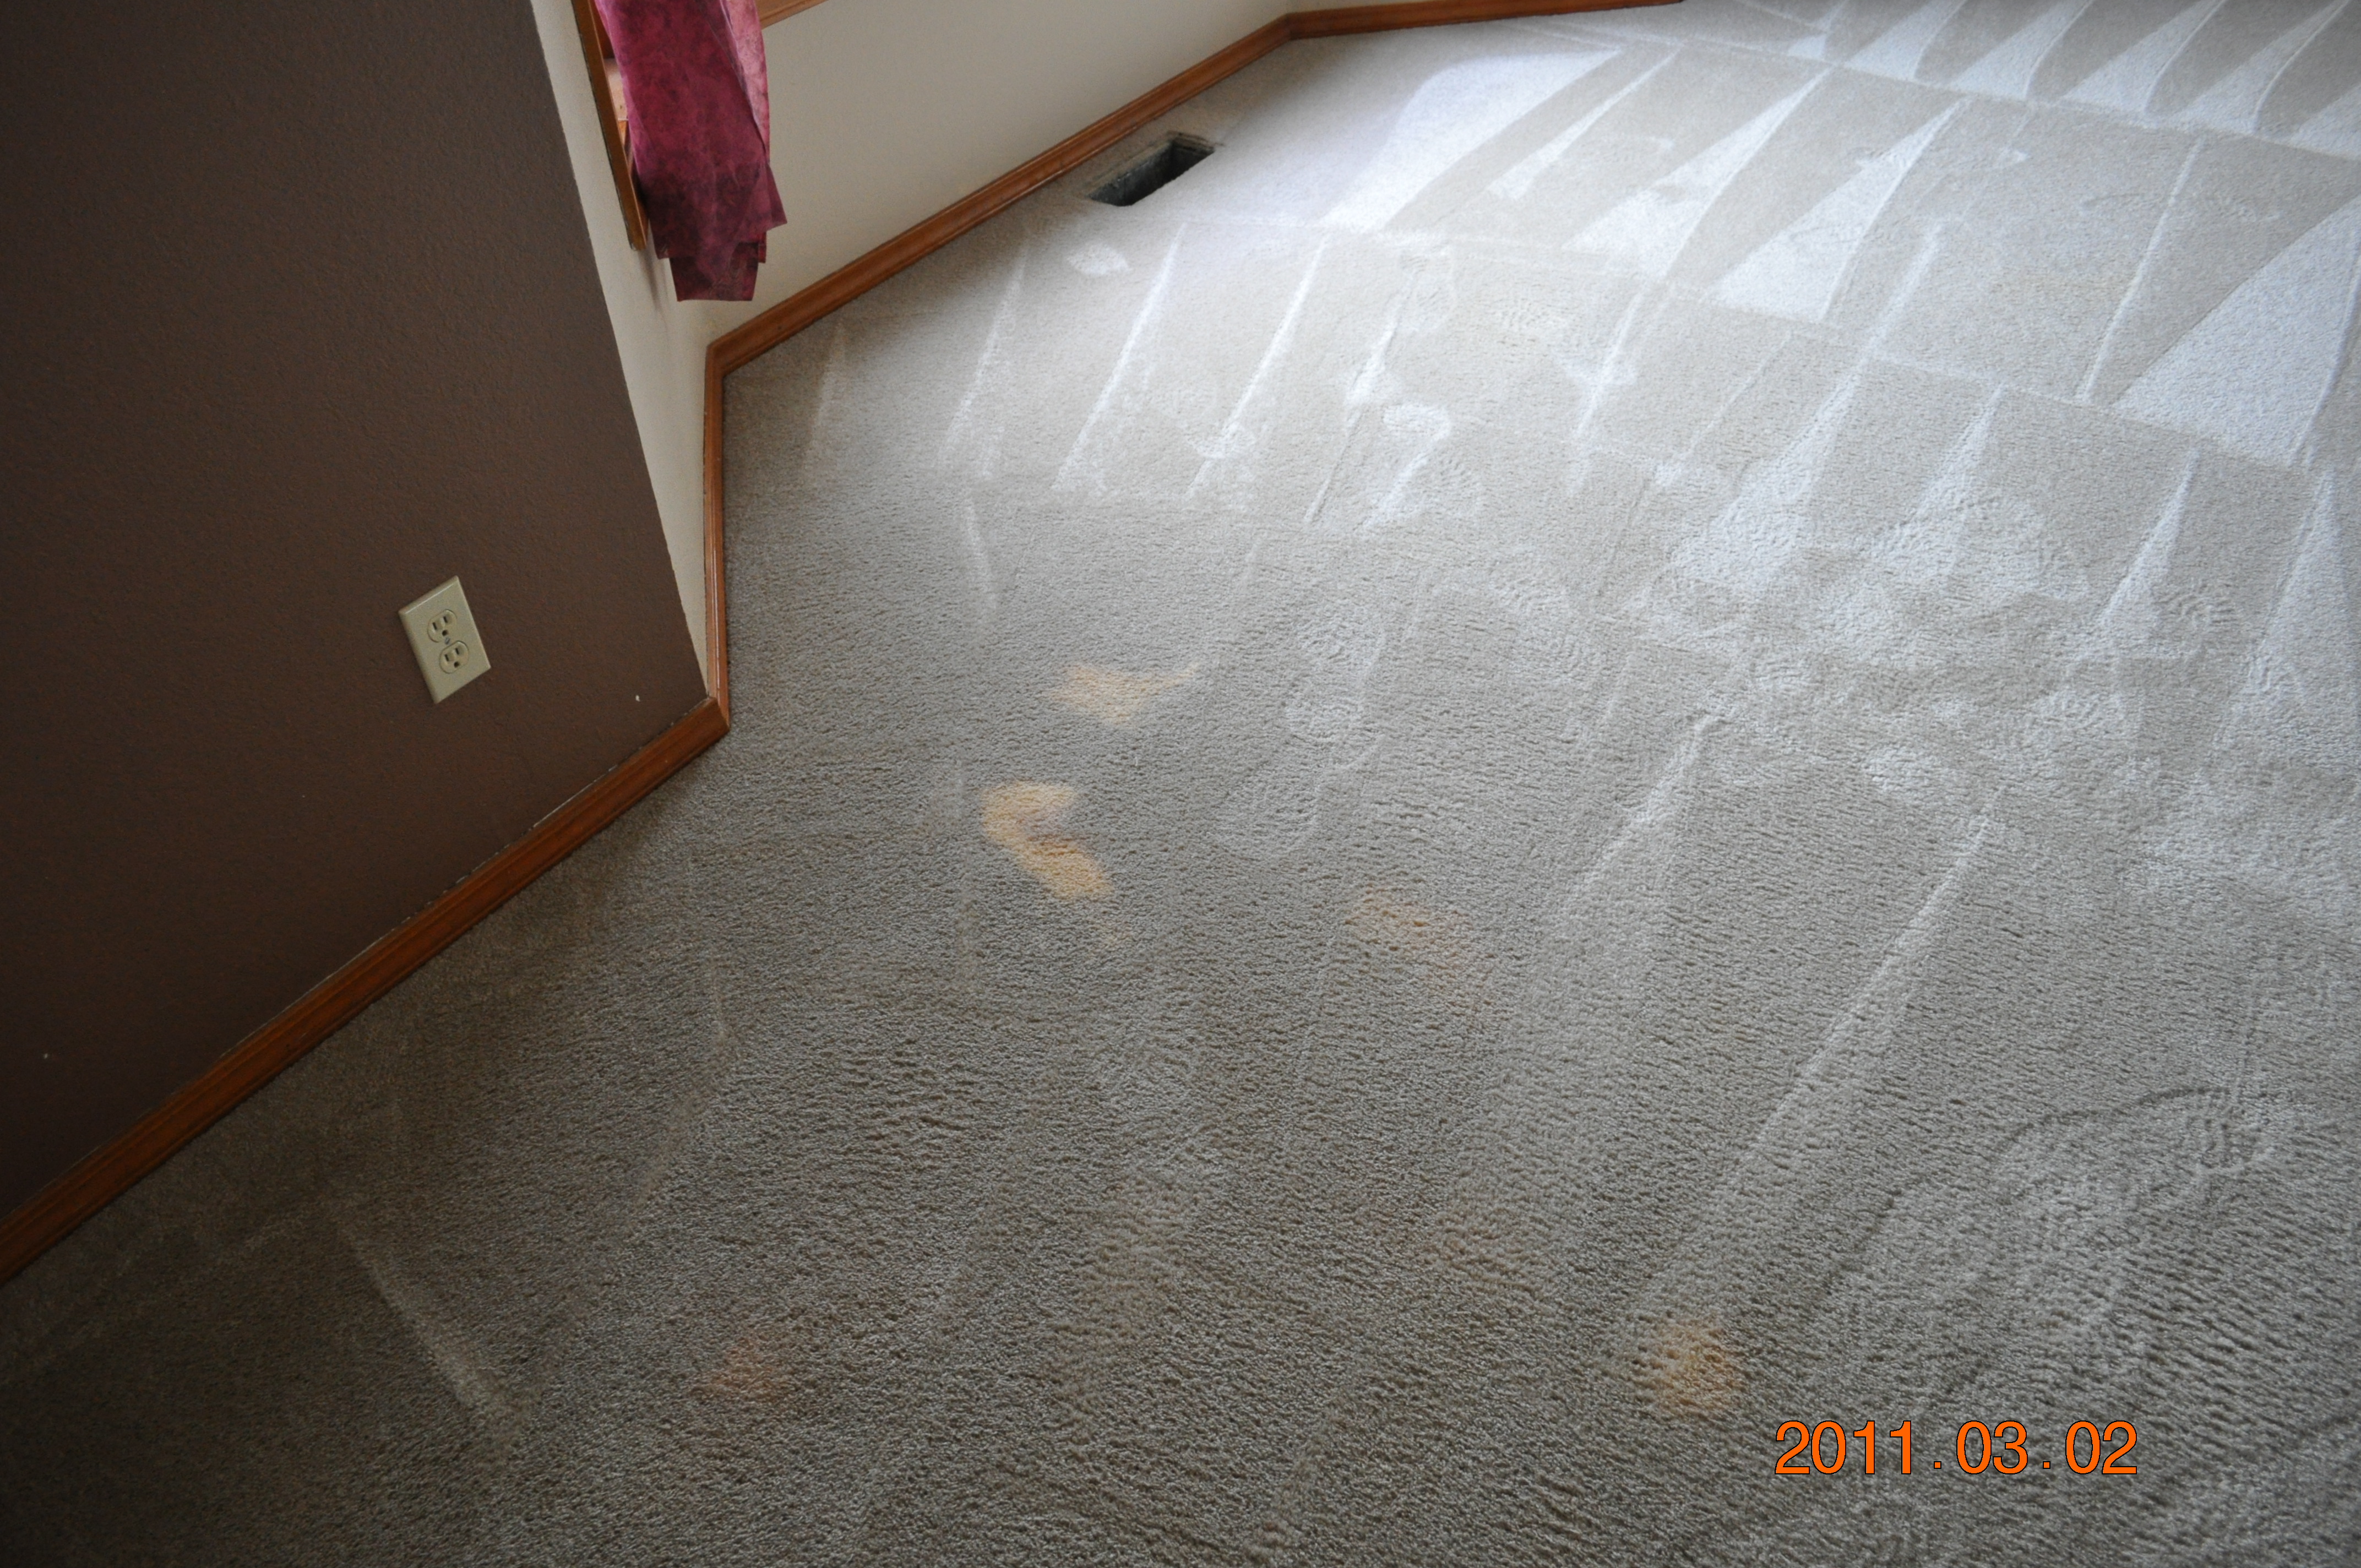 Guarantee System Carpet Cleaning Kennewick Richland Pasco WA Guarantee Carpet Cleaning & Dye Co.